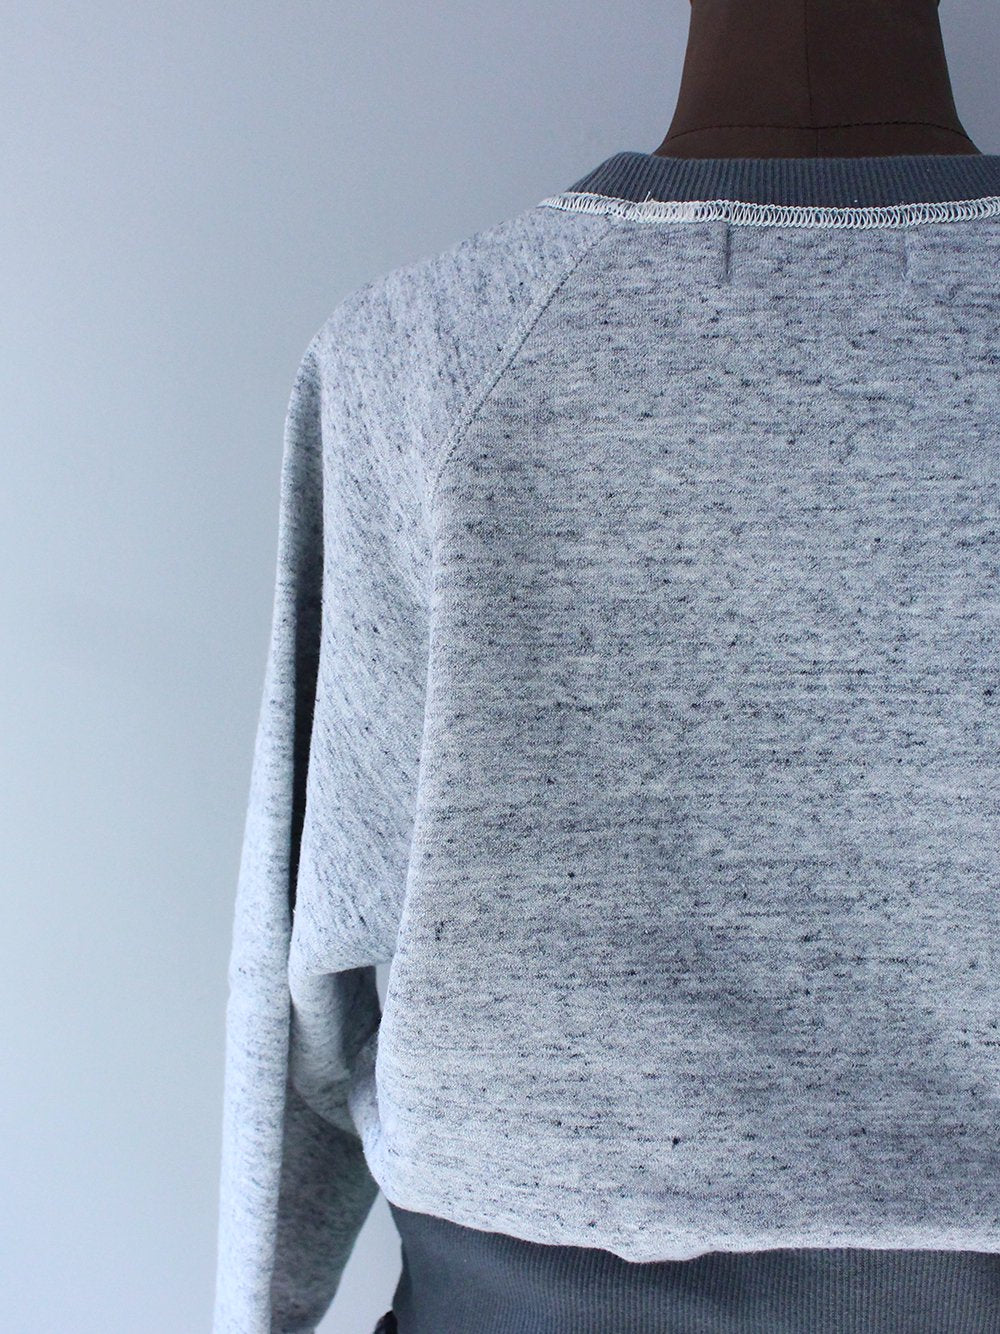 FILL THE BILL " BY COLLOR SHORT SWEAT ( GRAY x OLIVE)"